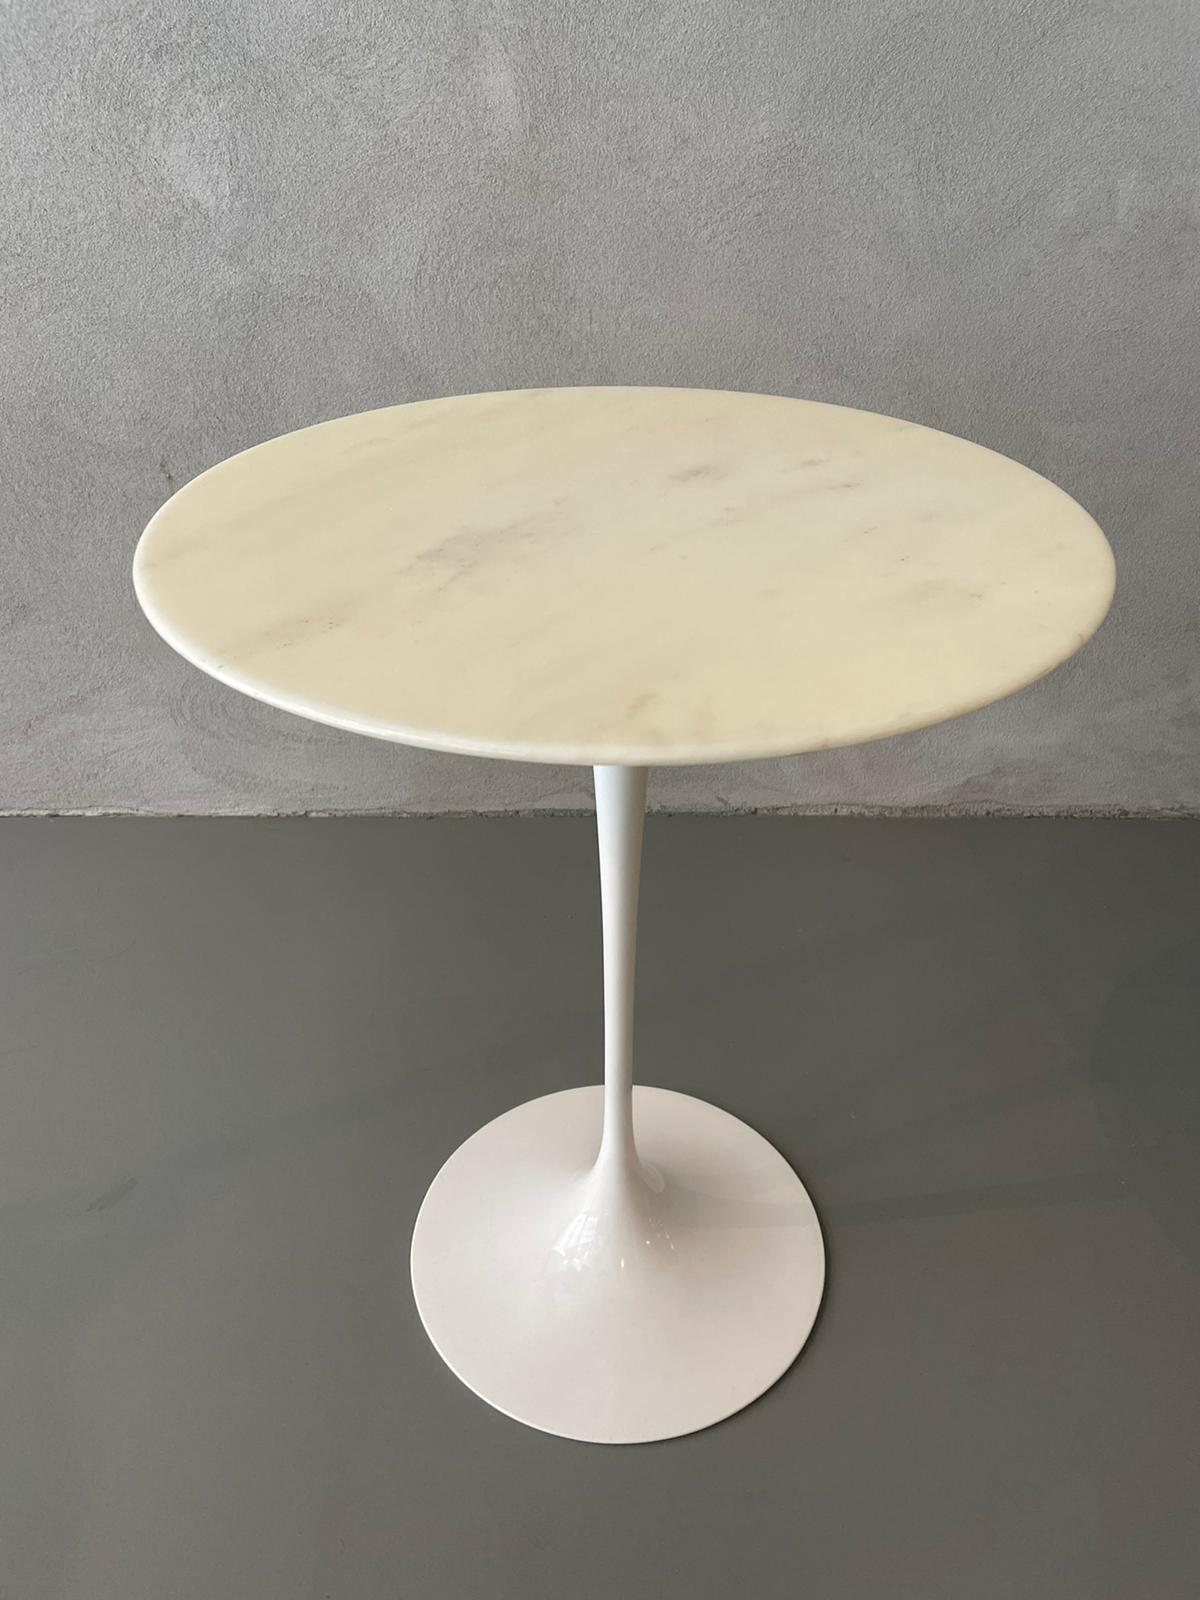 A fine example of a coffe table Italian Carrara by Eero Saarinen for Knoll, Calacatta marble top and white cast metal tulip pedestal base.

Eero Saarinen vowed to address the “ugly, confusing, unrestful world” he observed underneath chairs and